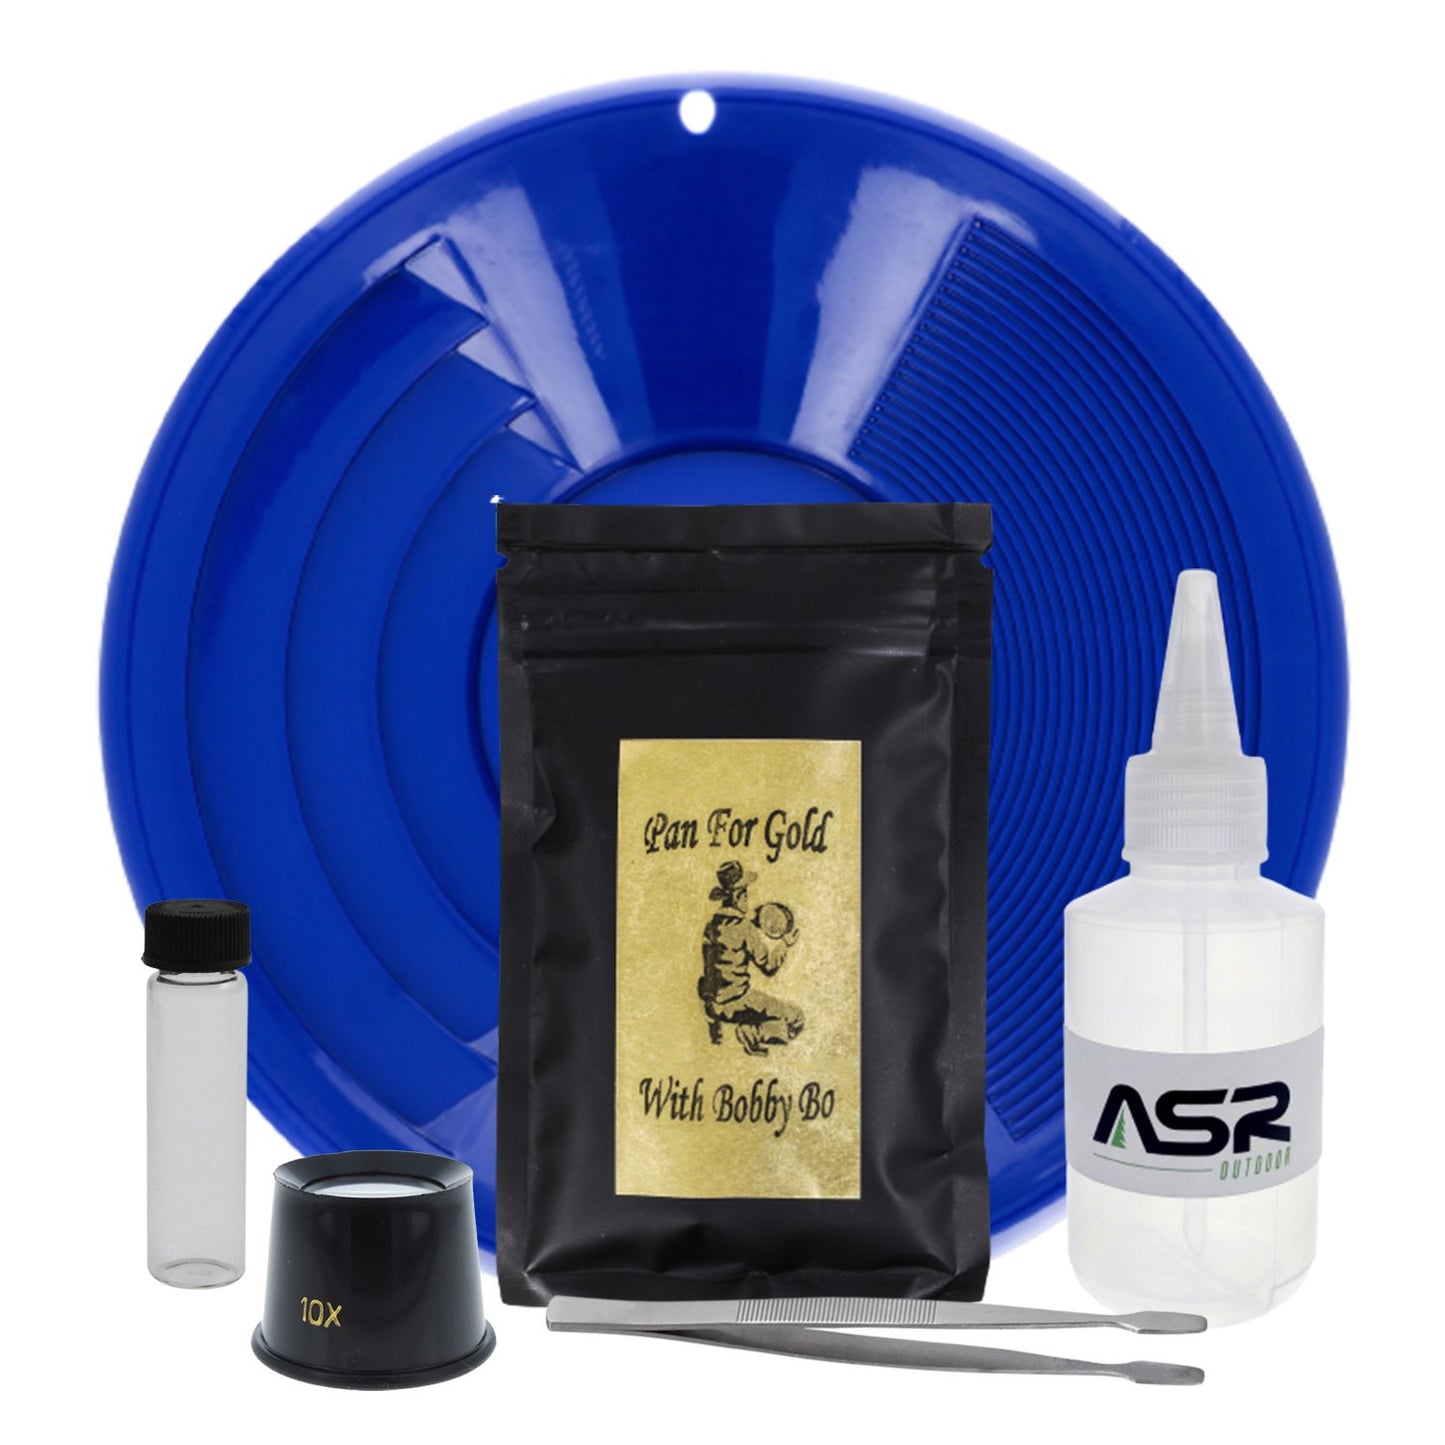 ASR Outdoor X Pan for Gold with Bobby Bo 3oz Beginner Paydirt Gold Panning Kit, 6pc